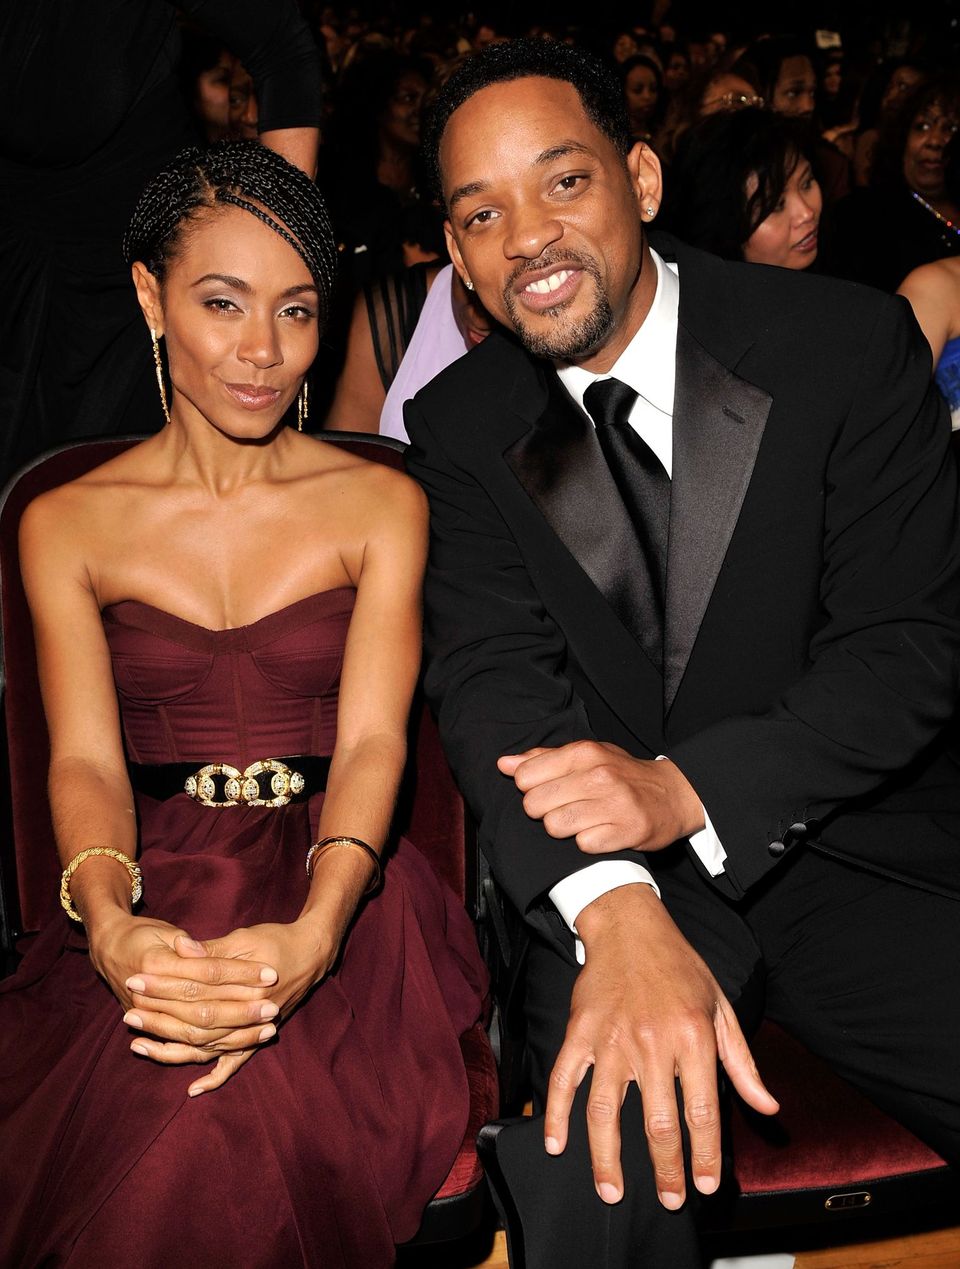 Jada Pinkett Smith & Will Smith at the 40th NAACP Image Awards on February 12, 2009 in California | Photo: Getty Images